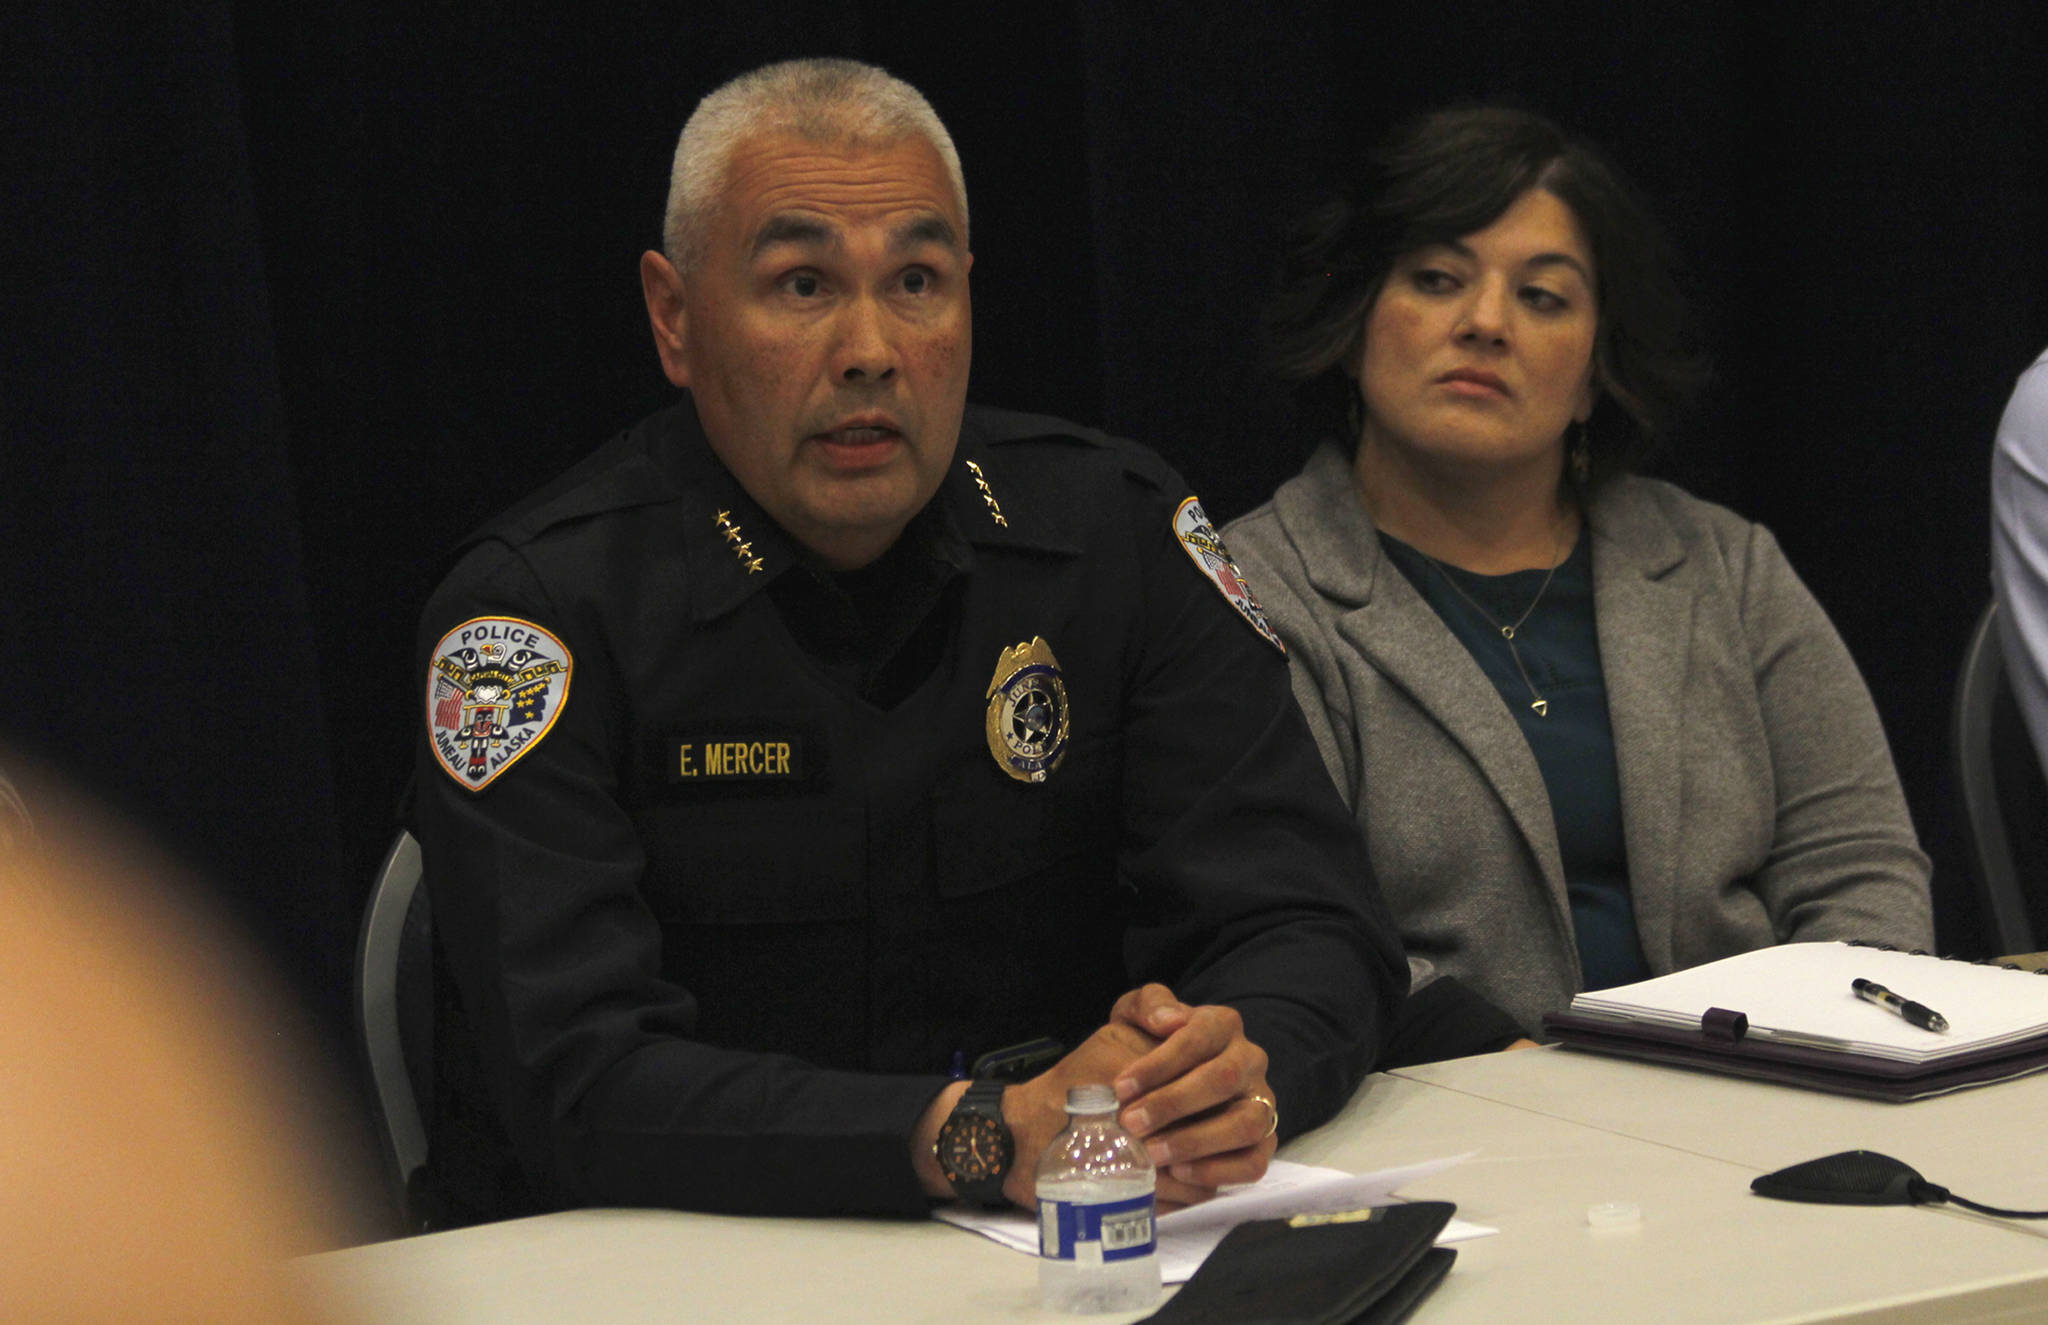 Juneau Police Department Chief Ed Mercer speaks at a special meeting of the Uptown Neighborhood Association on Tuesday, July 10, 2018. (Alex McCarthy | Juneau Empire)